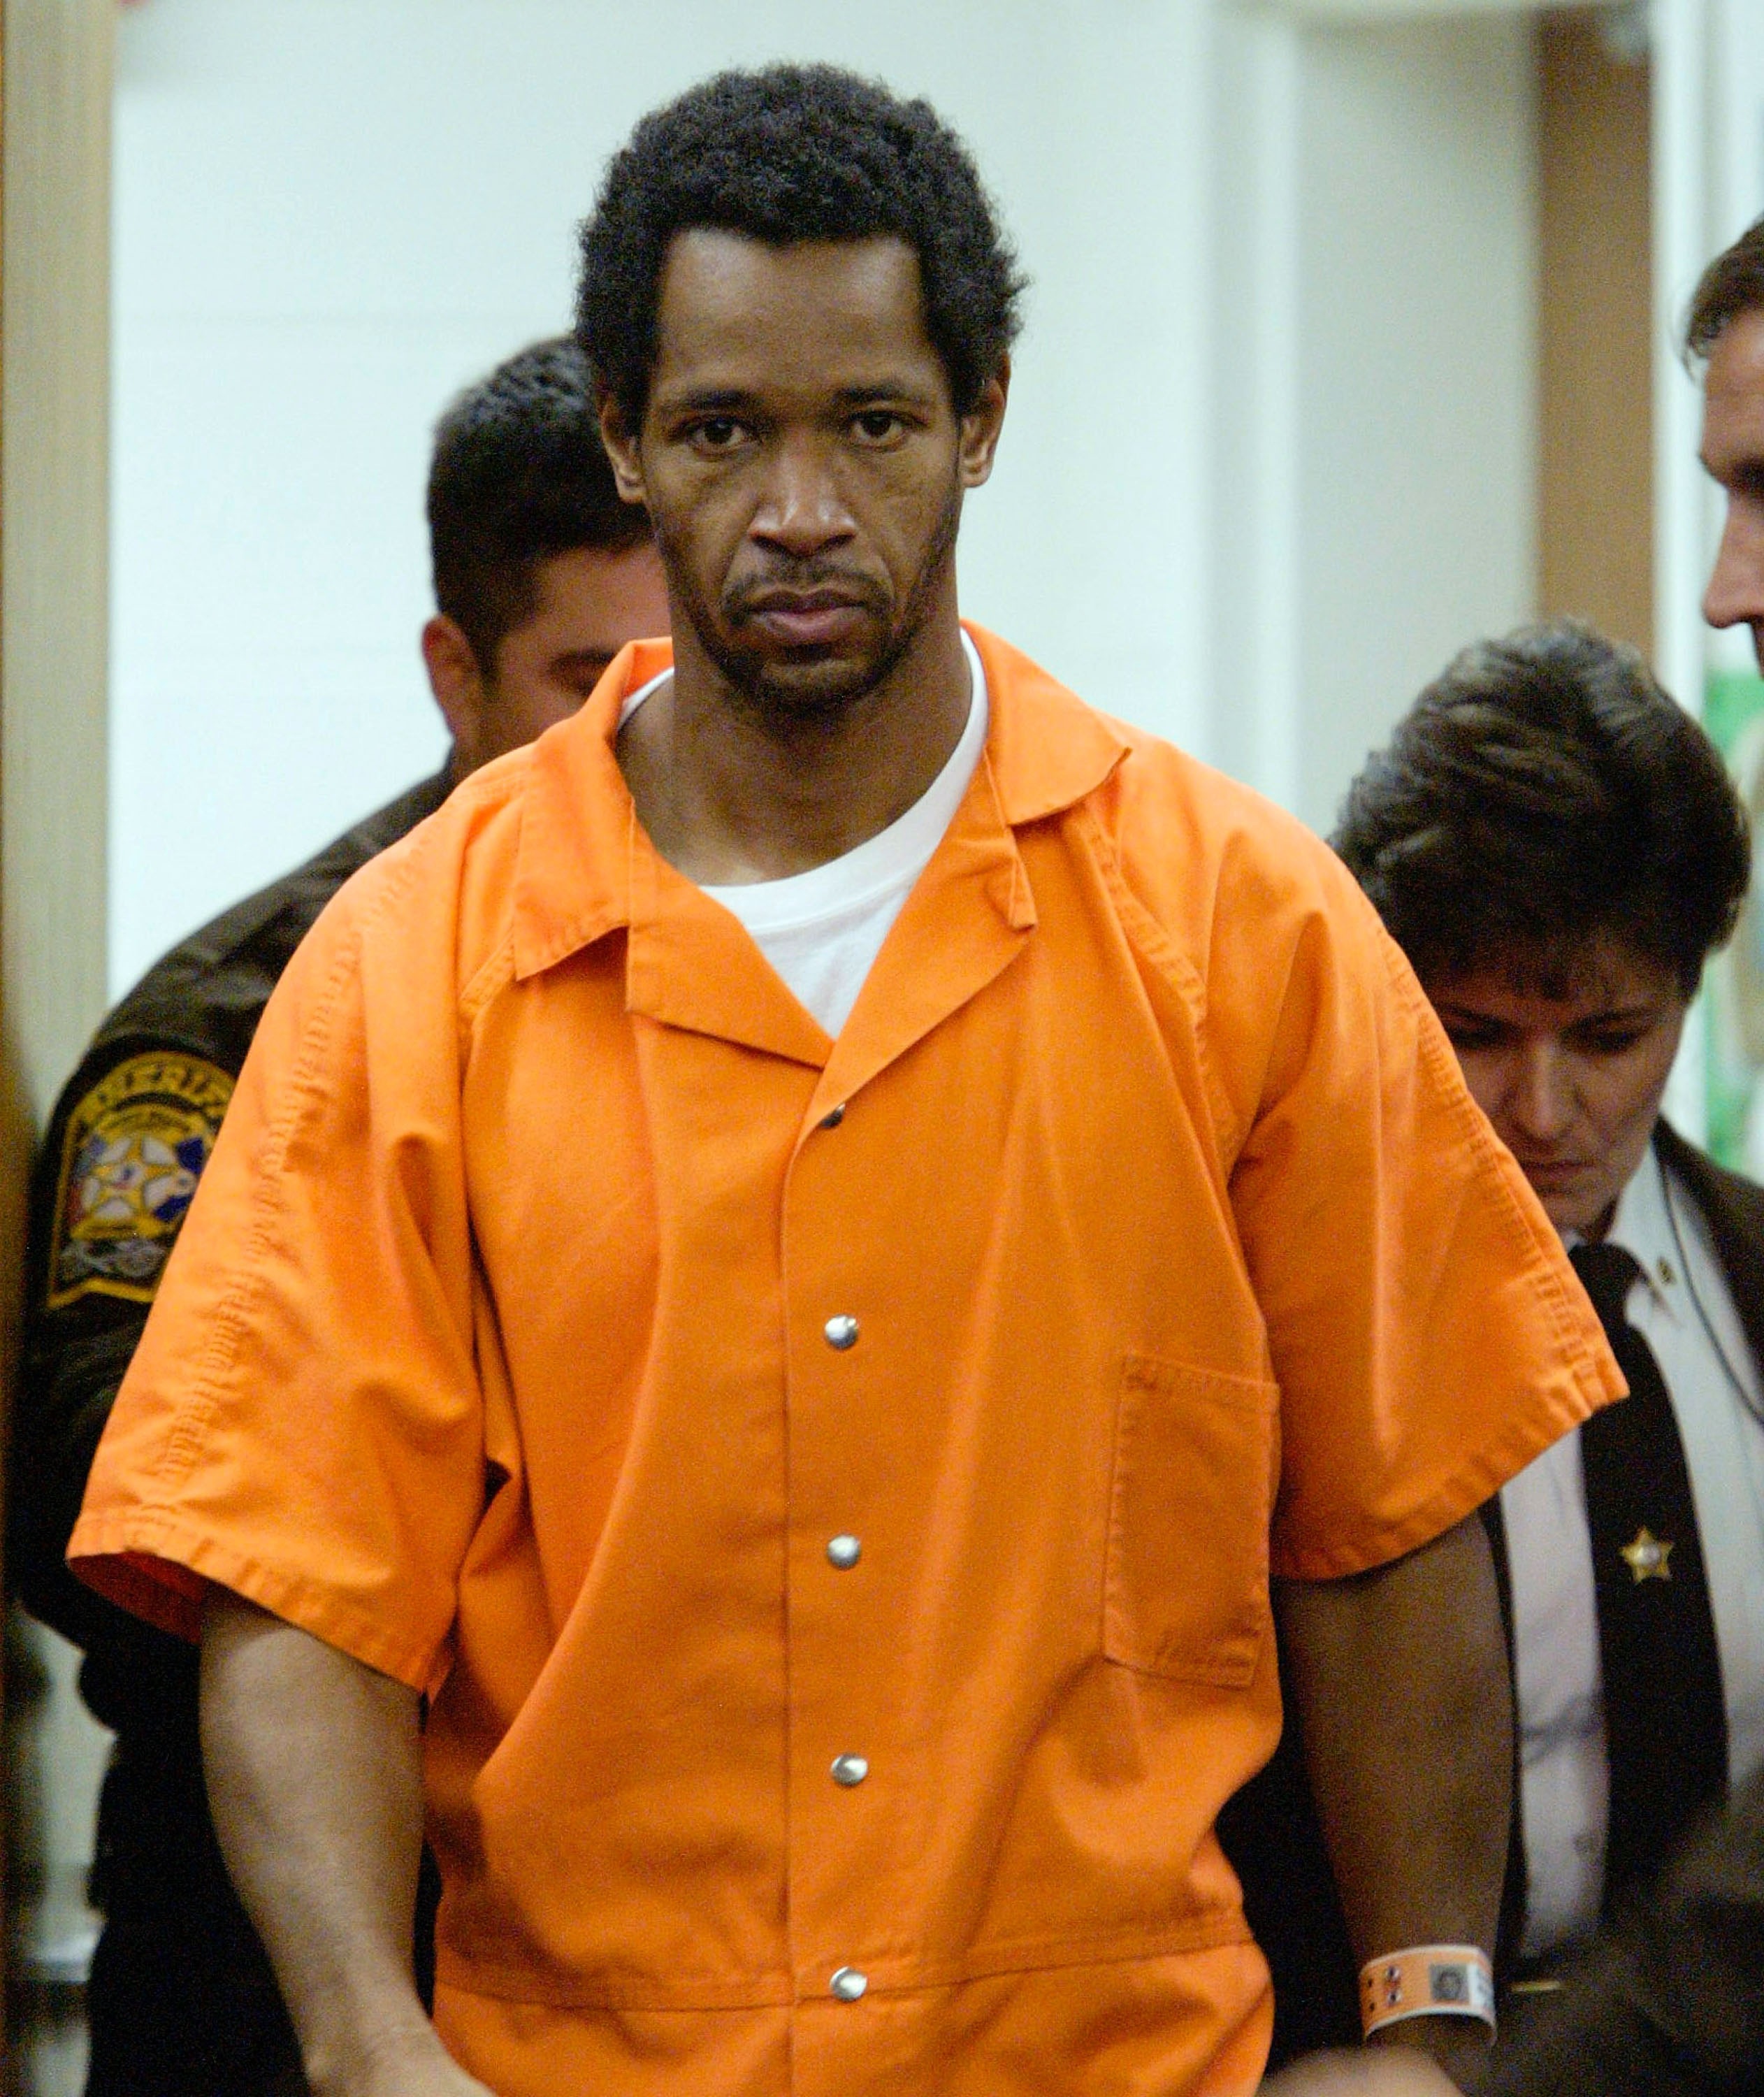 Sniper suspect John Allen Muhammad arrives in Prince William Circuit Court to appear before Judge Leroy F. Millette for a hearing to appoint council November 13, 2002 in Manassas, Virginia. (Photo by Jahi Chikwendiu-Pool/Getty Images)